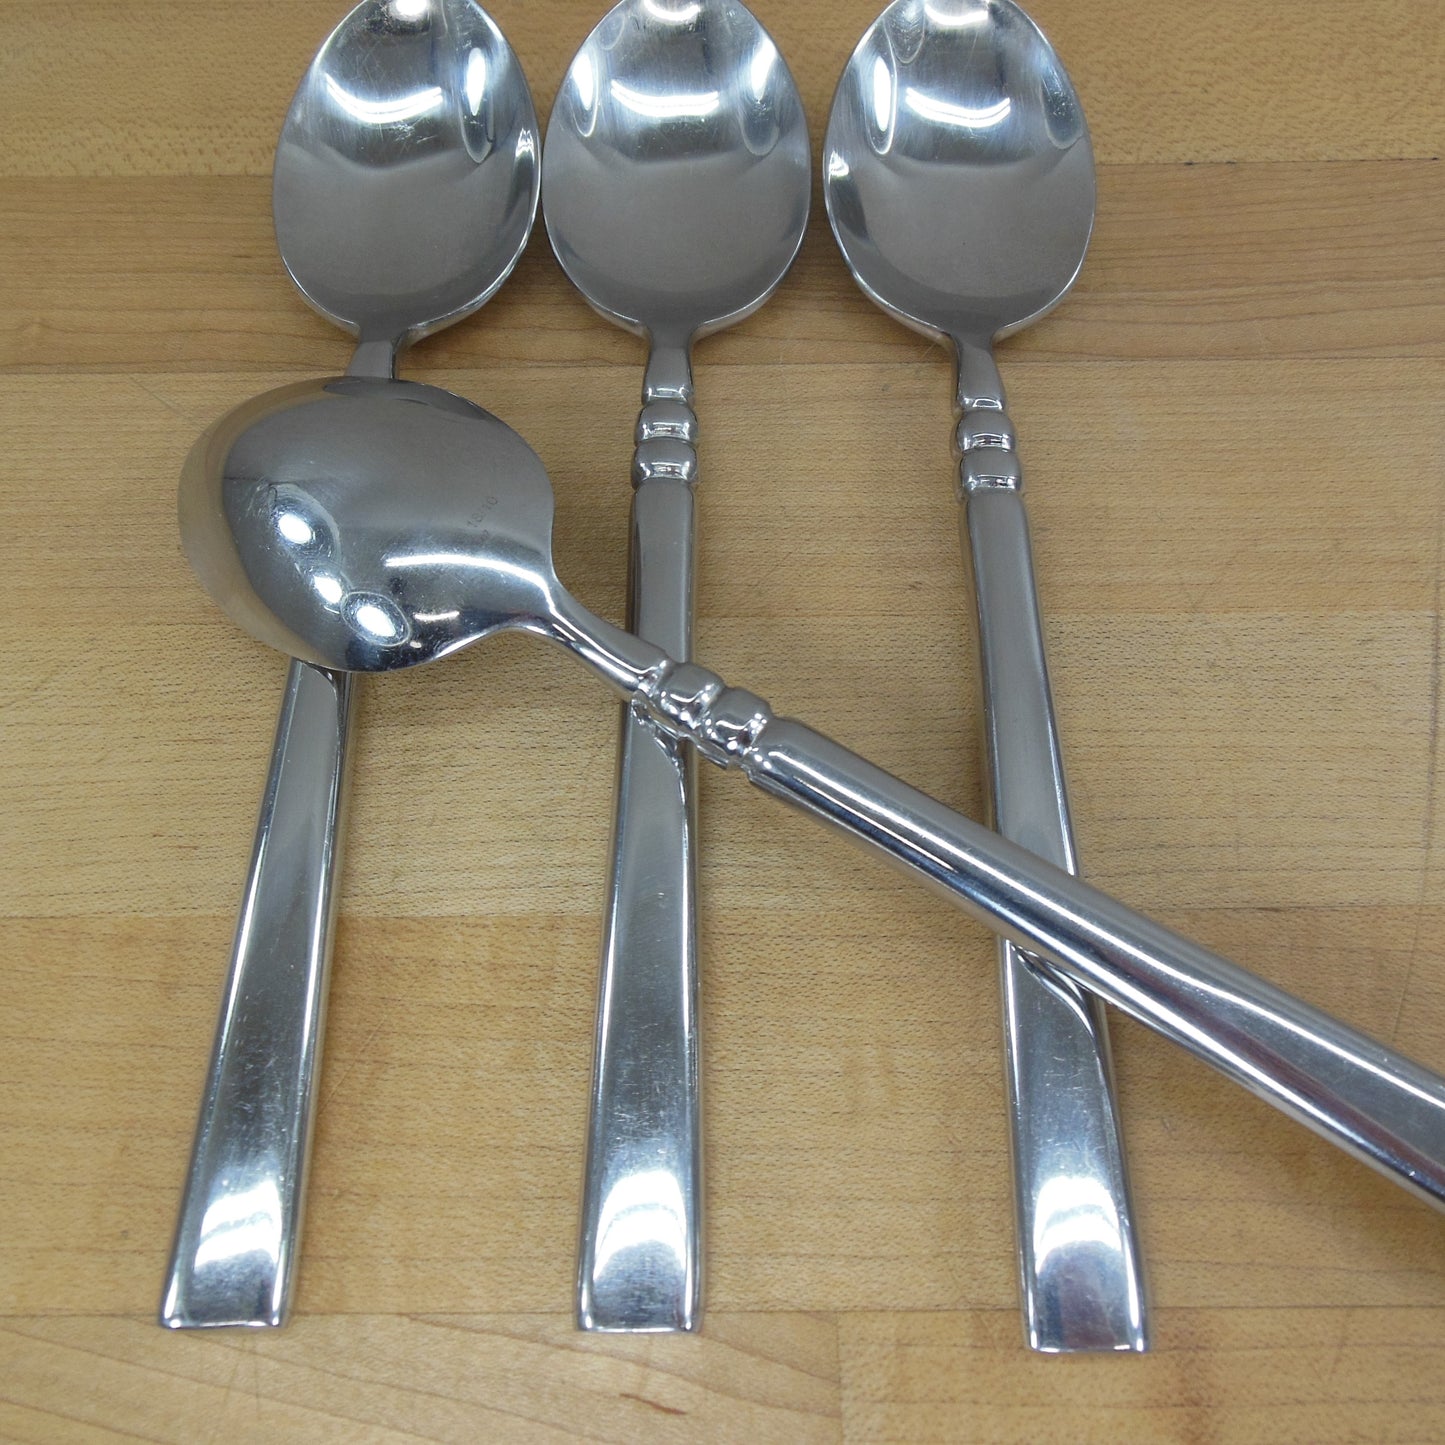 Oneida China Tortola Stainless Flatware - 4 Place/Soup Spoons 7-3/4"